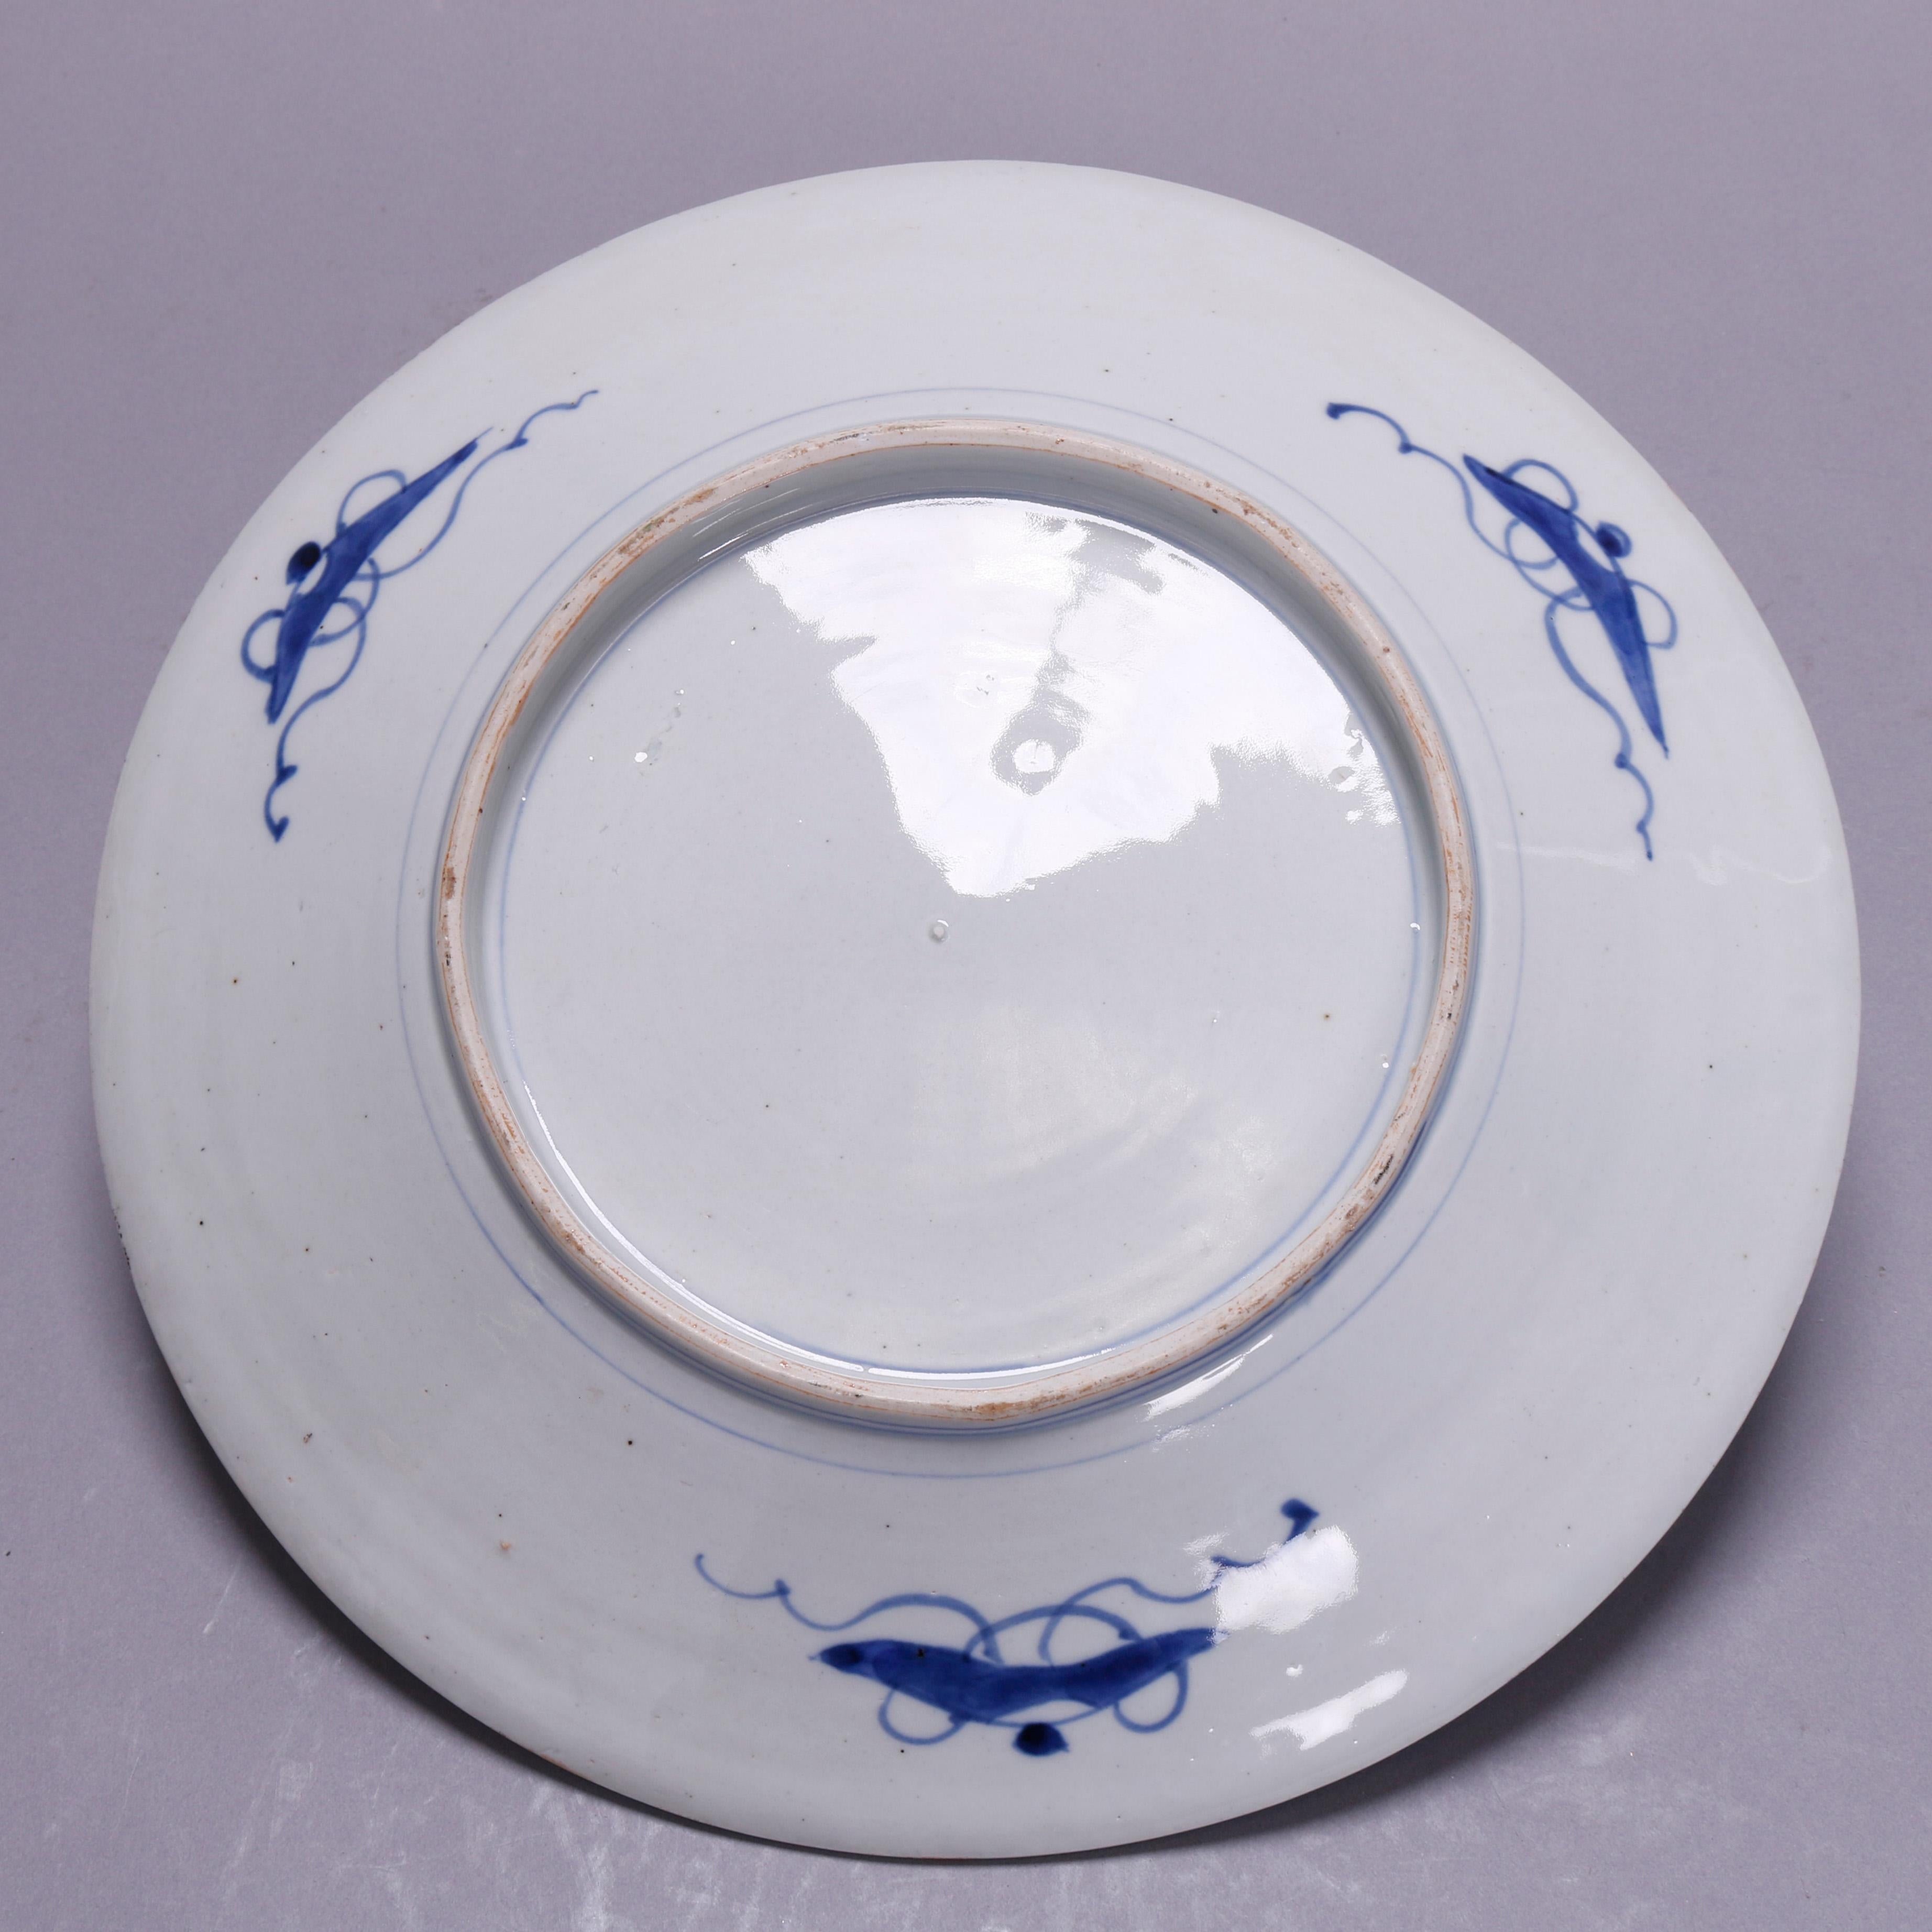 An antique Japanese Imari charger offers porcelain construction with well having hand painted stylized floral decoration with surrounding rim with reserves of garden scenes, en verso blue decorated, circa 1910.

Measures: 2